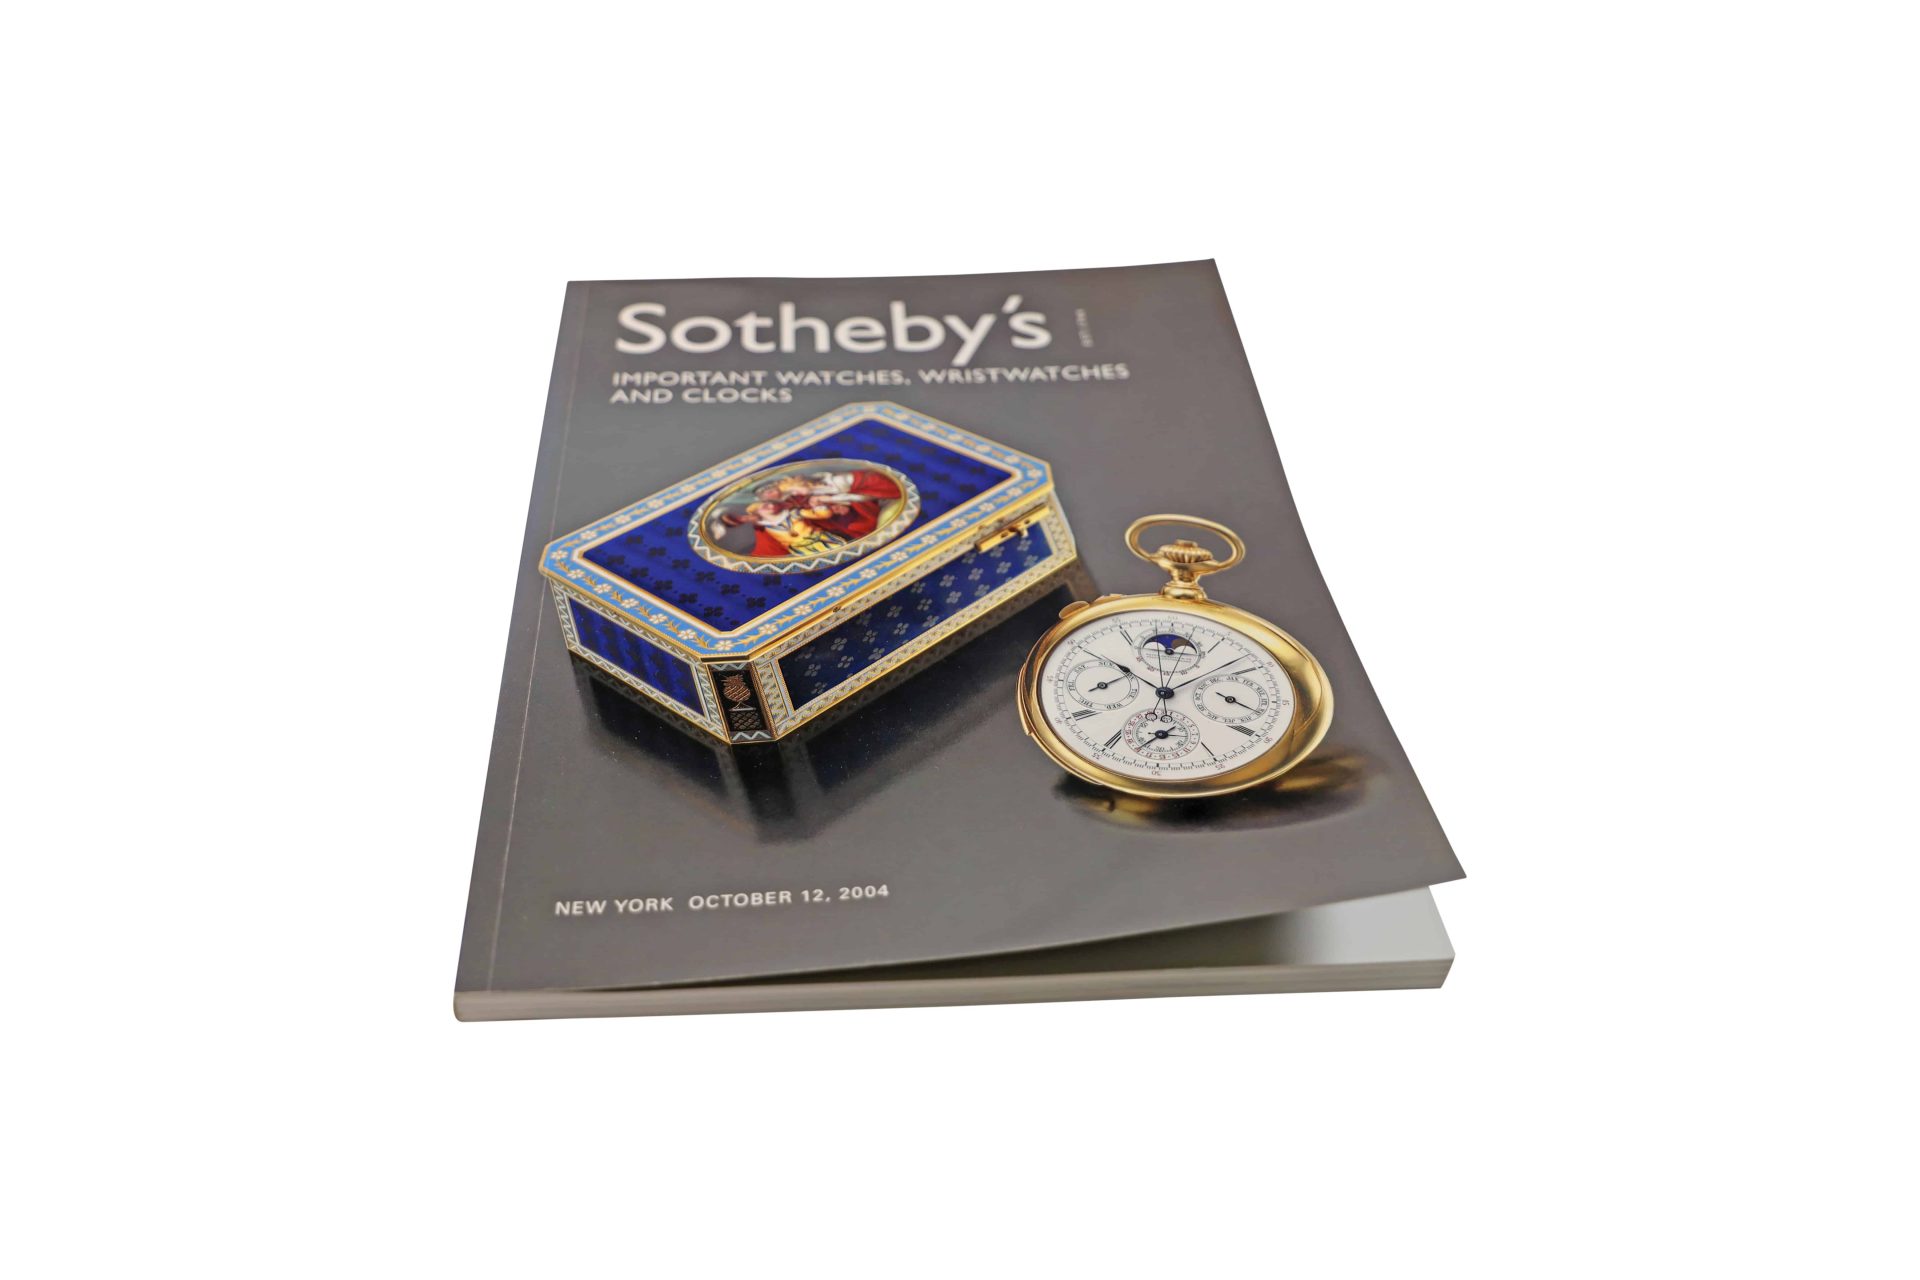 Sotheby's Important Watches, Wristwatches And Cloaks New York October 12, 2004 Auction Catalog - Rare Watch Parts